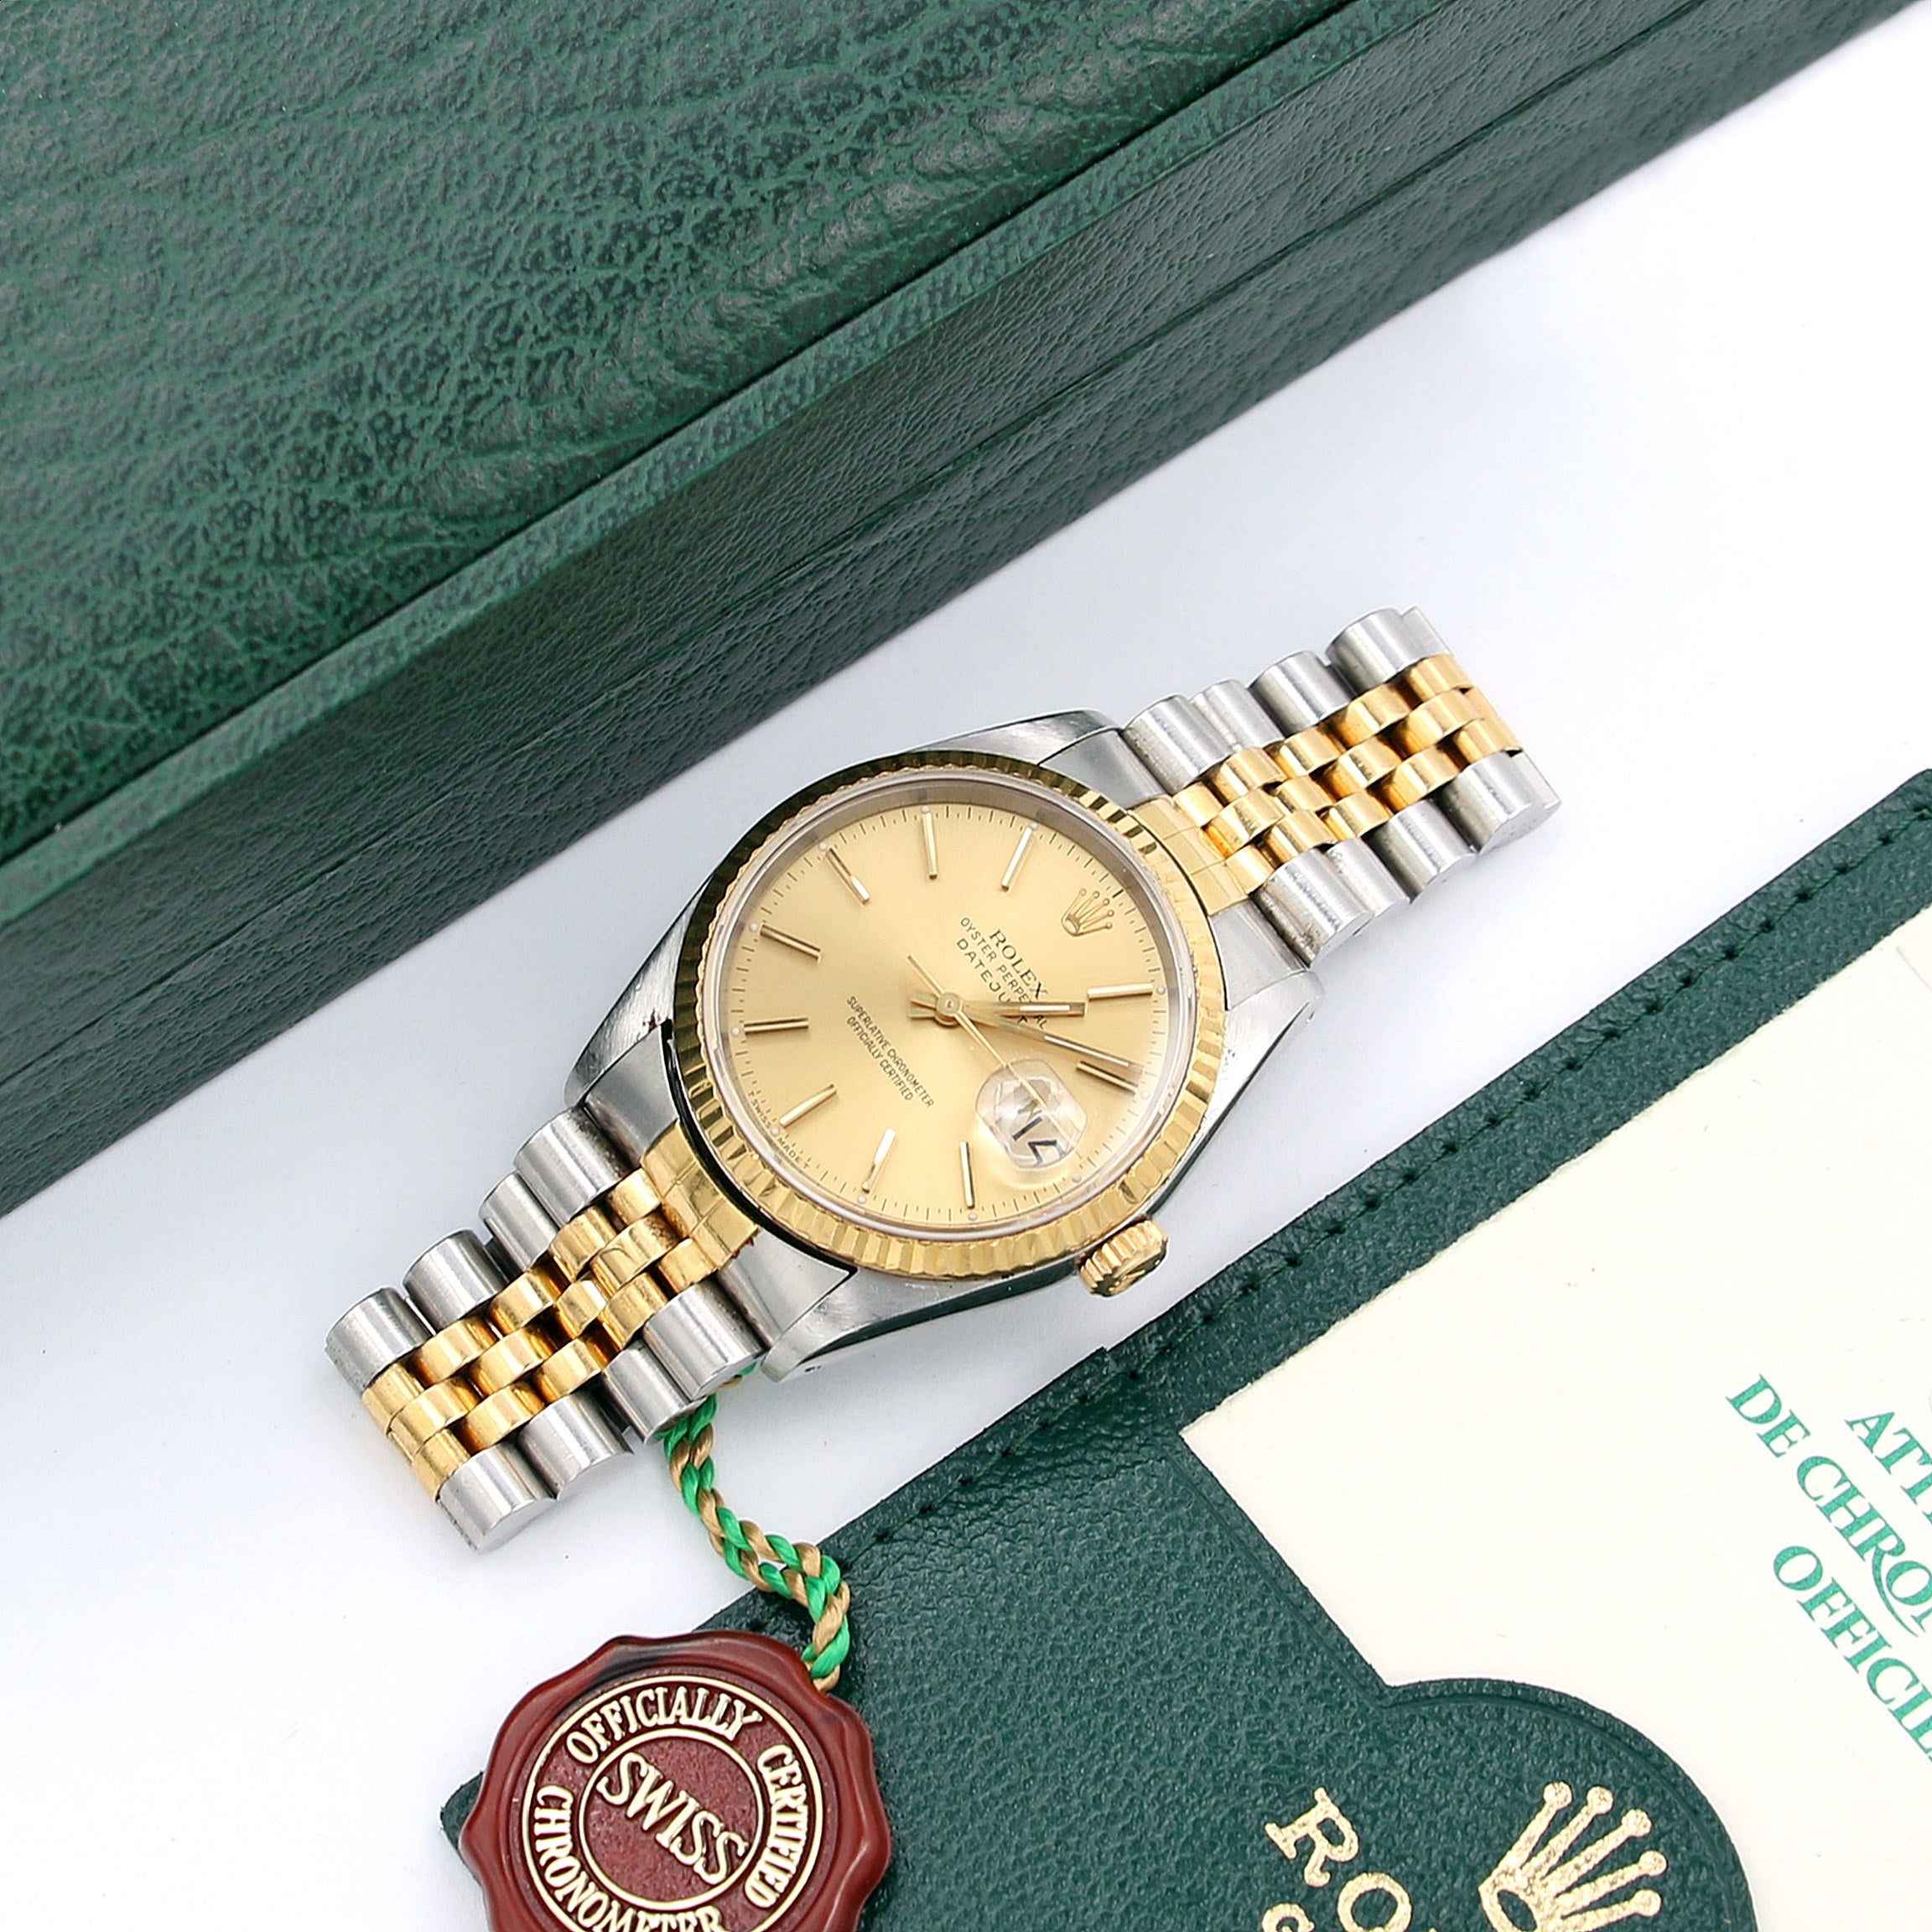 Rolex Datejust 36 ref. 16233 Champagne dial with Papers